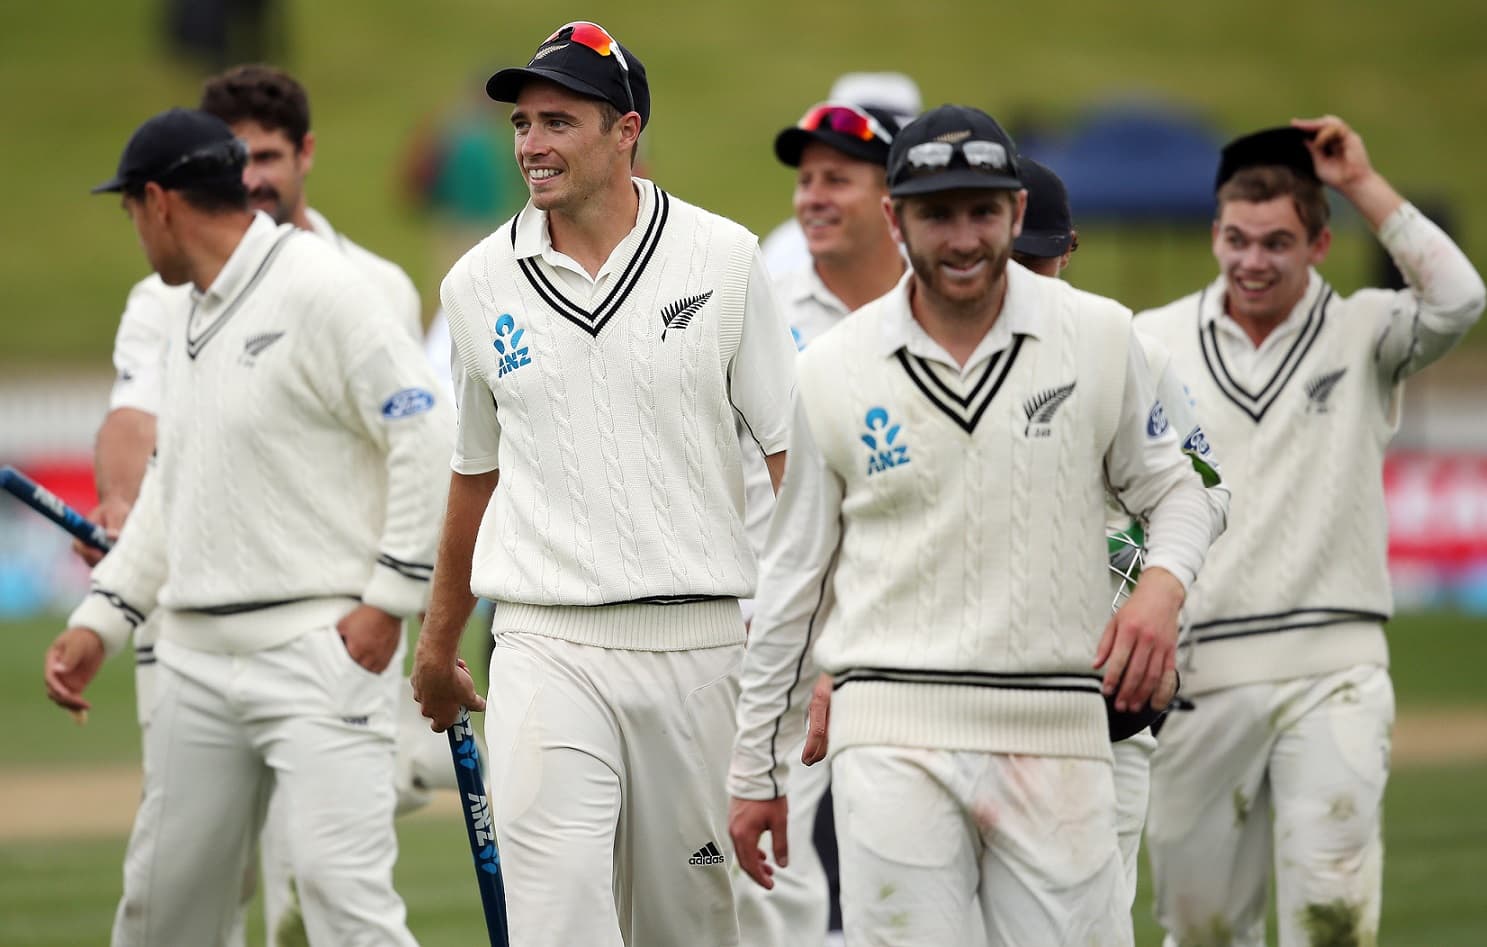 Pakistan collapse to first series defeat to NZ in 30 years